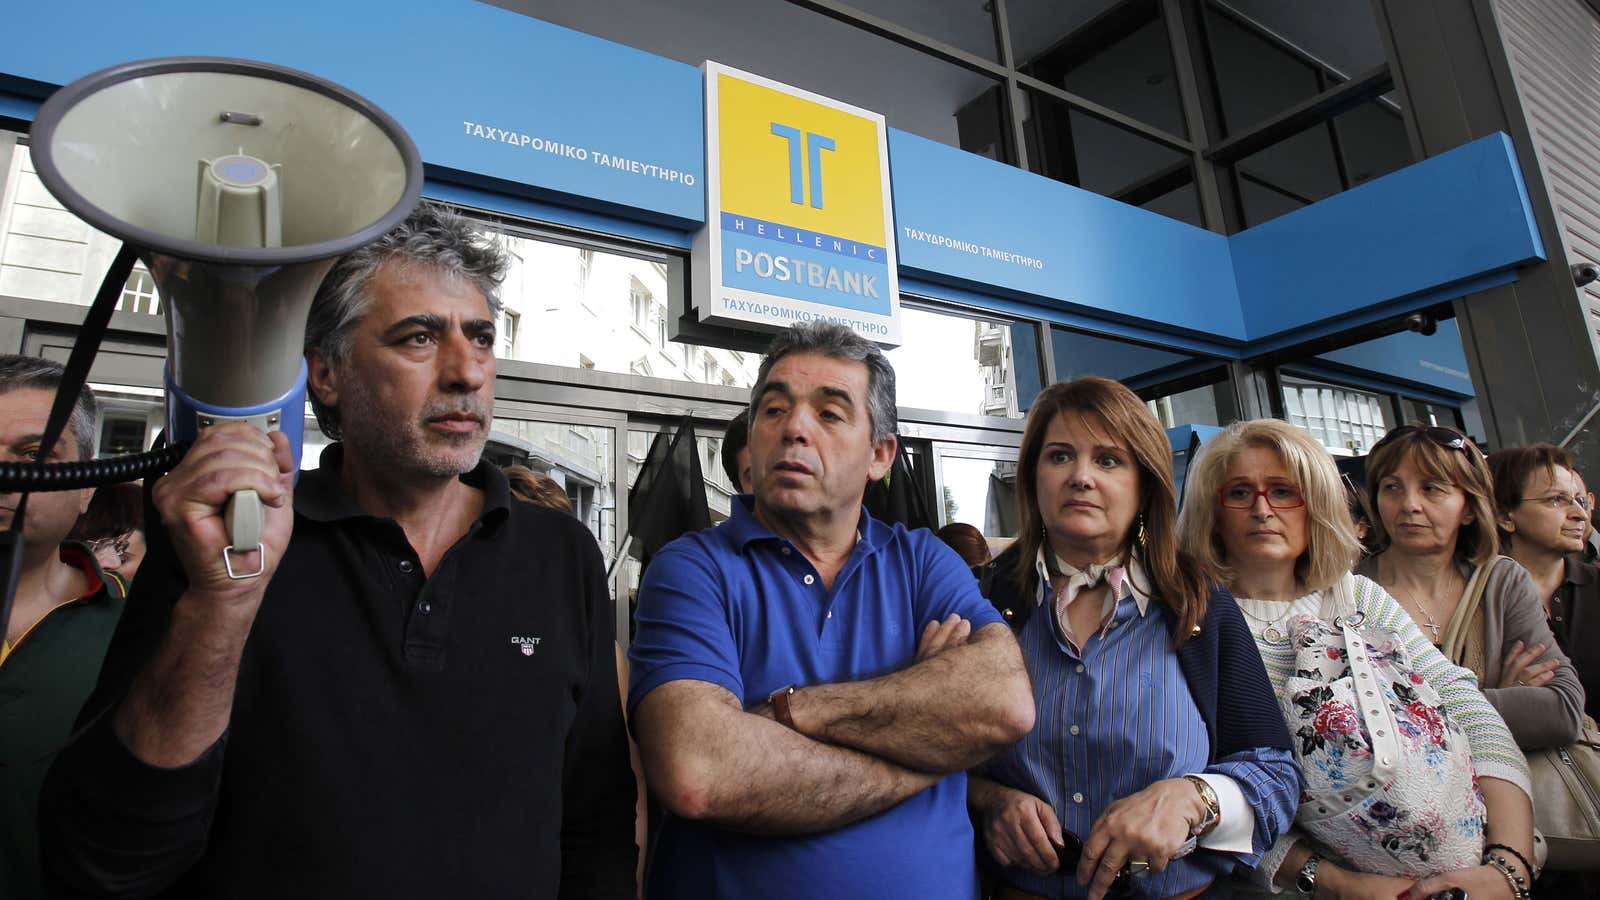 Greek banks are now as disgruntled as their employees.